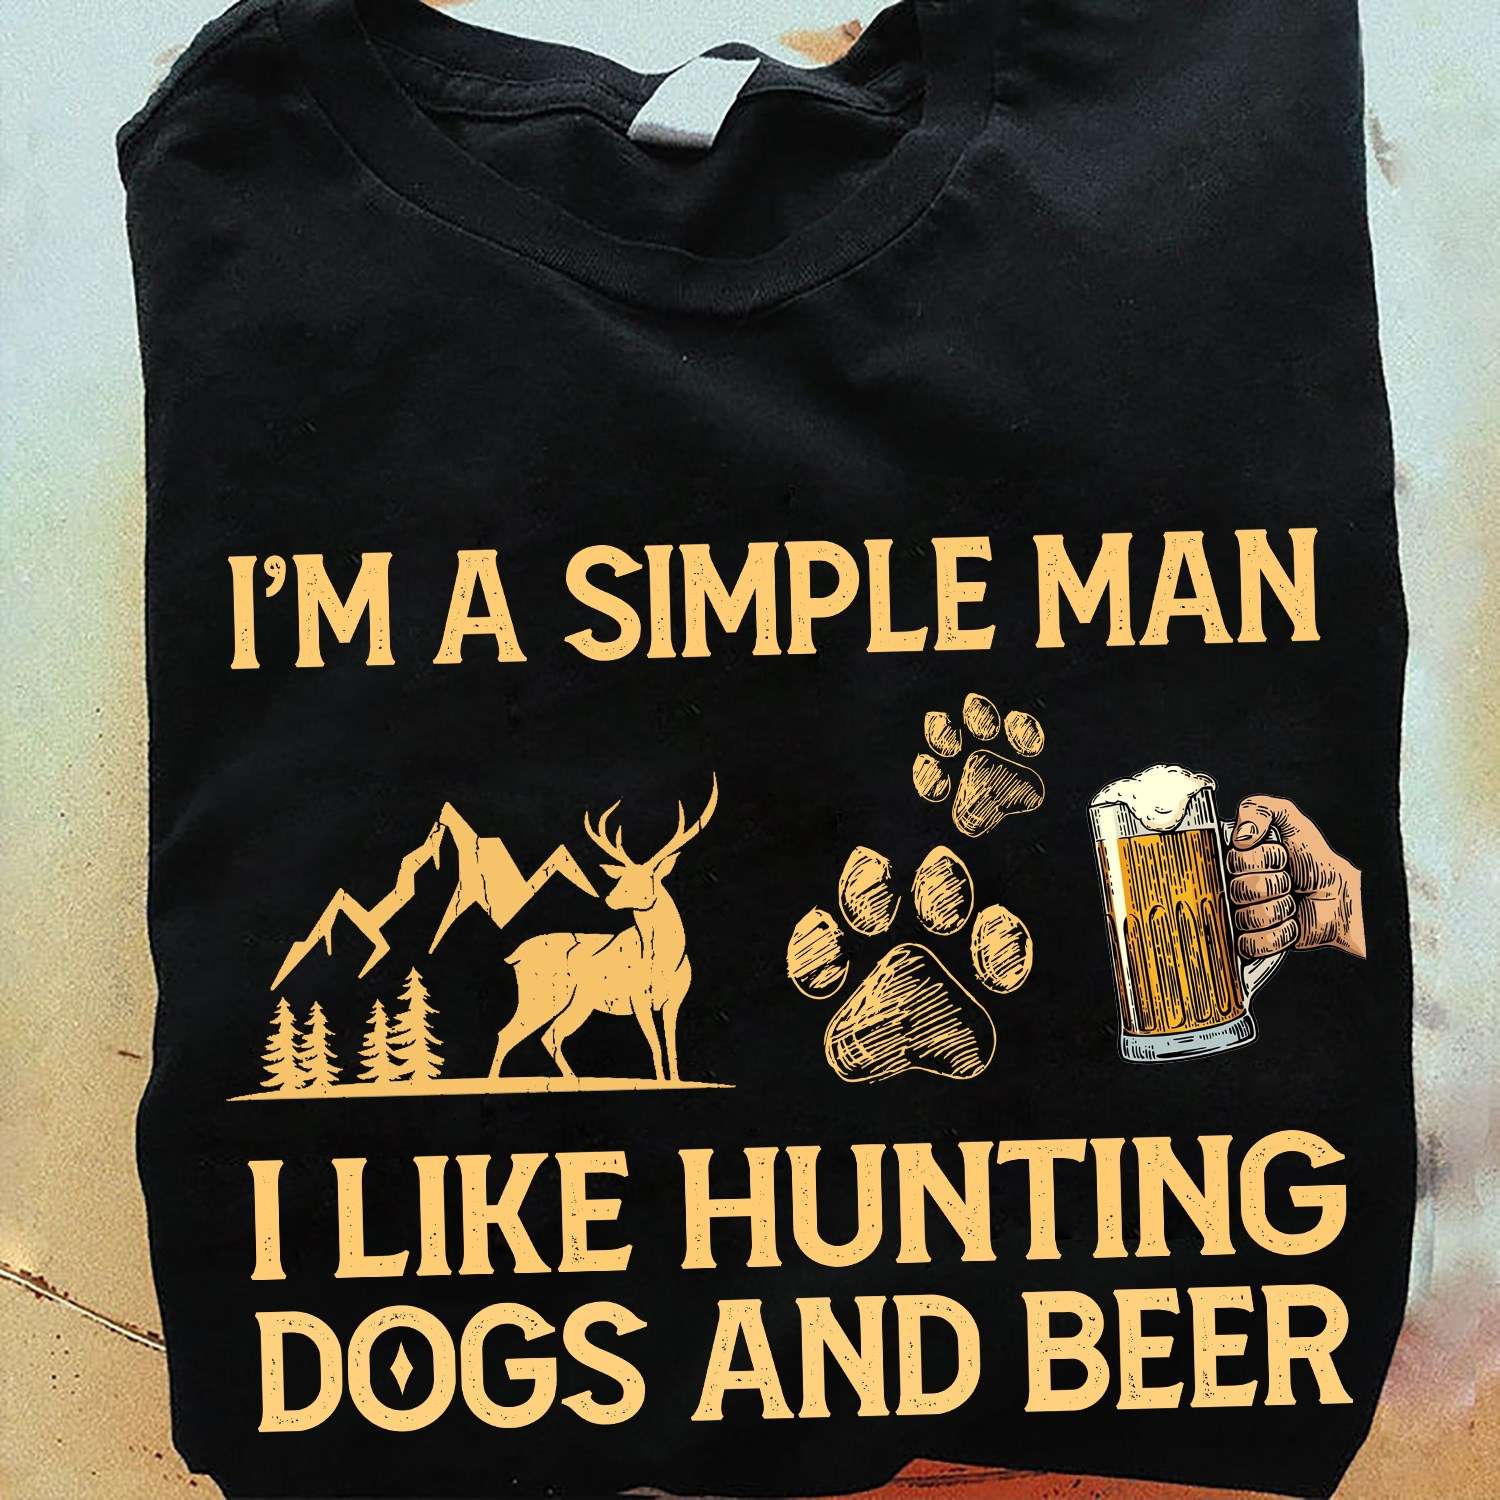 Deer Huting Dogs And Beer - I'm a simple man i like hunting dogs and beer